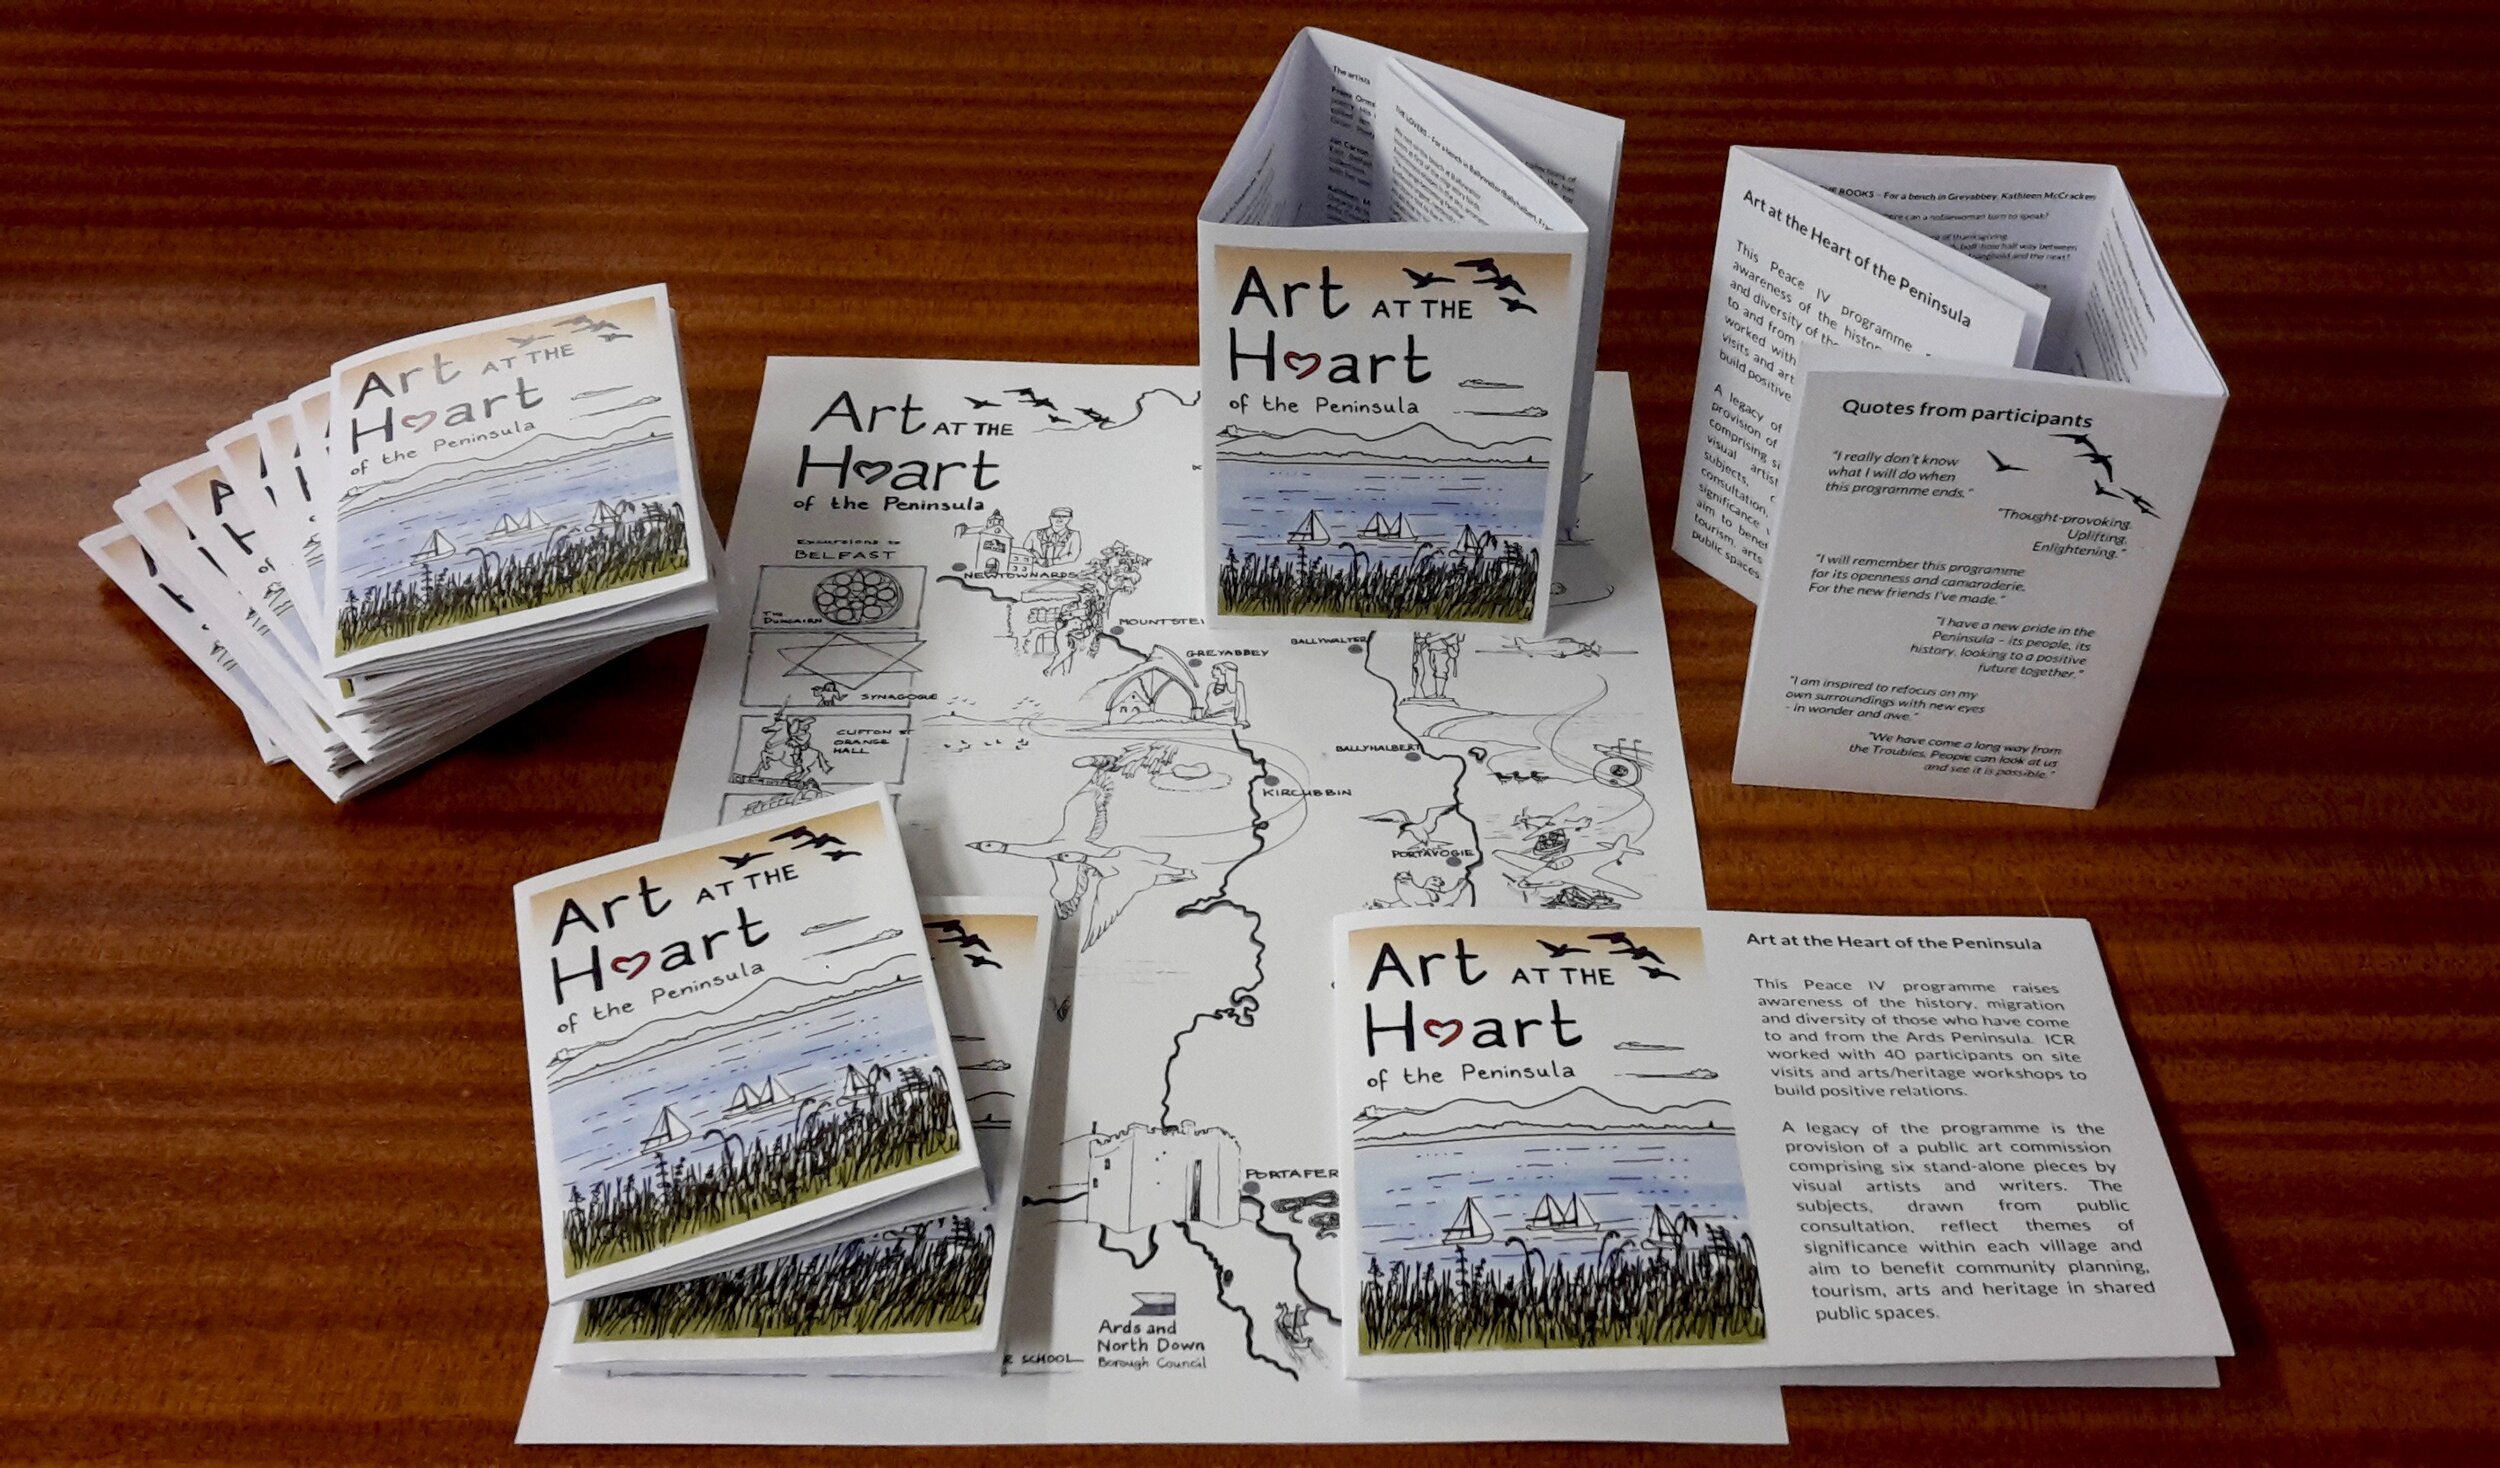 Hand-drawn map for a community engagement programme on the Ards Peninsula, NI